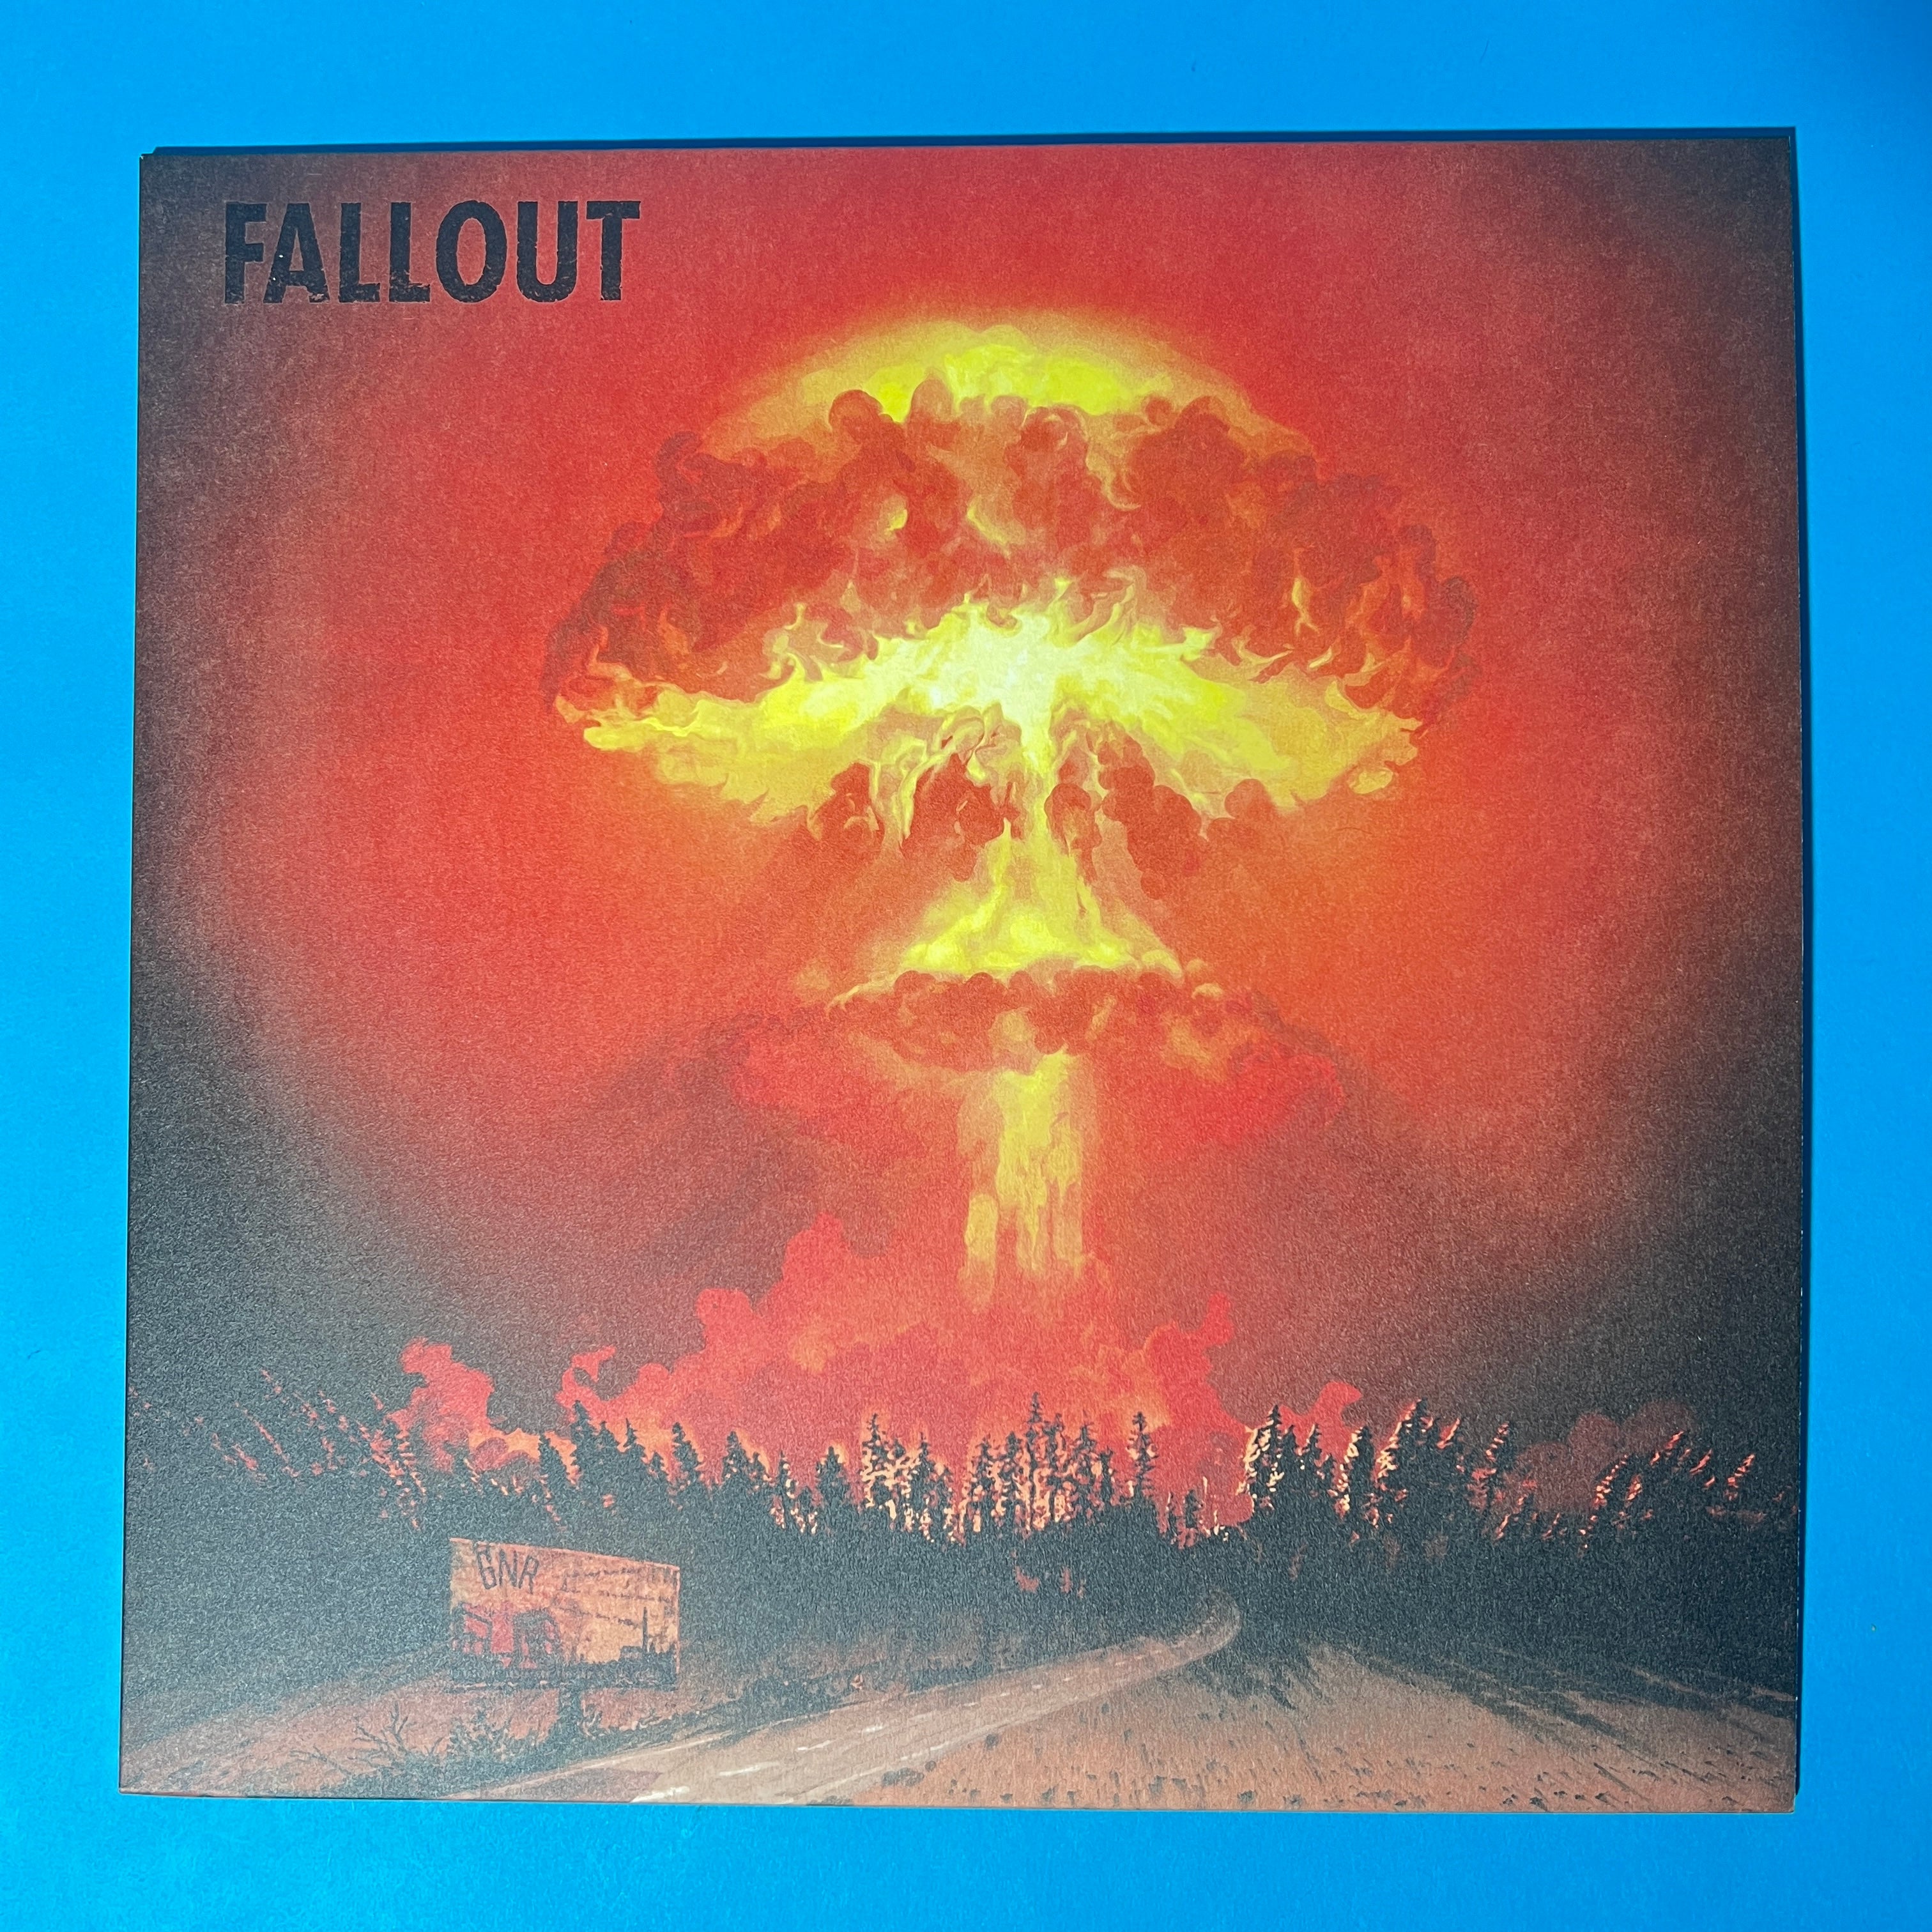 Fallout: Songs for the End of the World Vinyl Record – HiFi LoFi